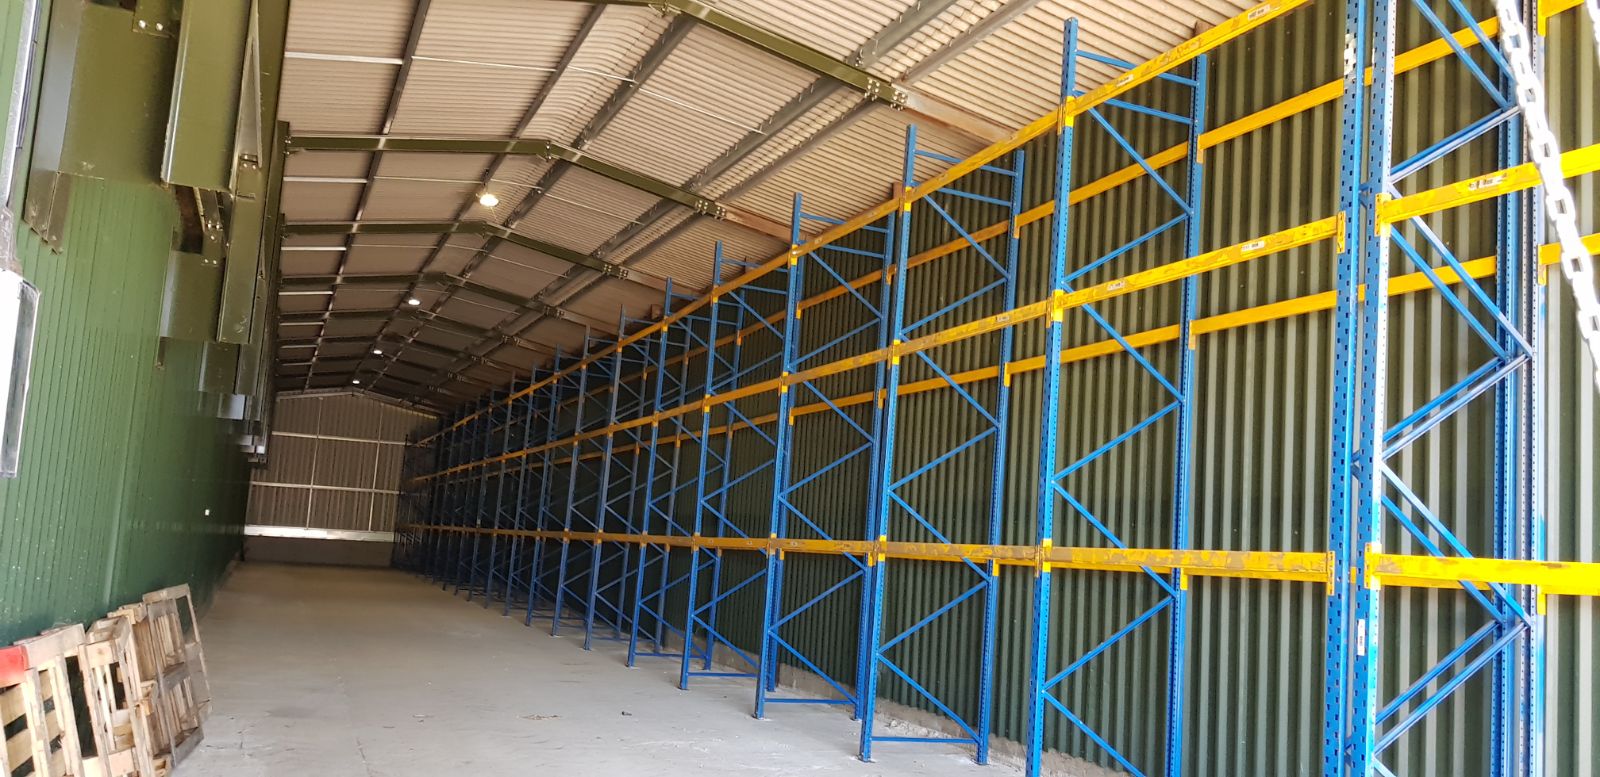 uk wide used racking clearance specialists